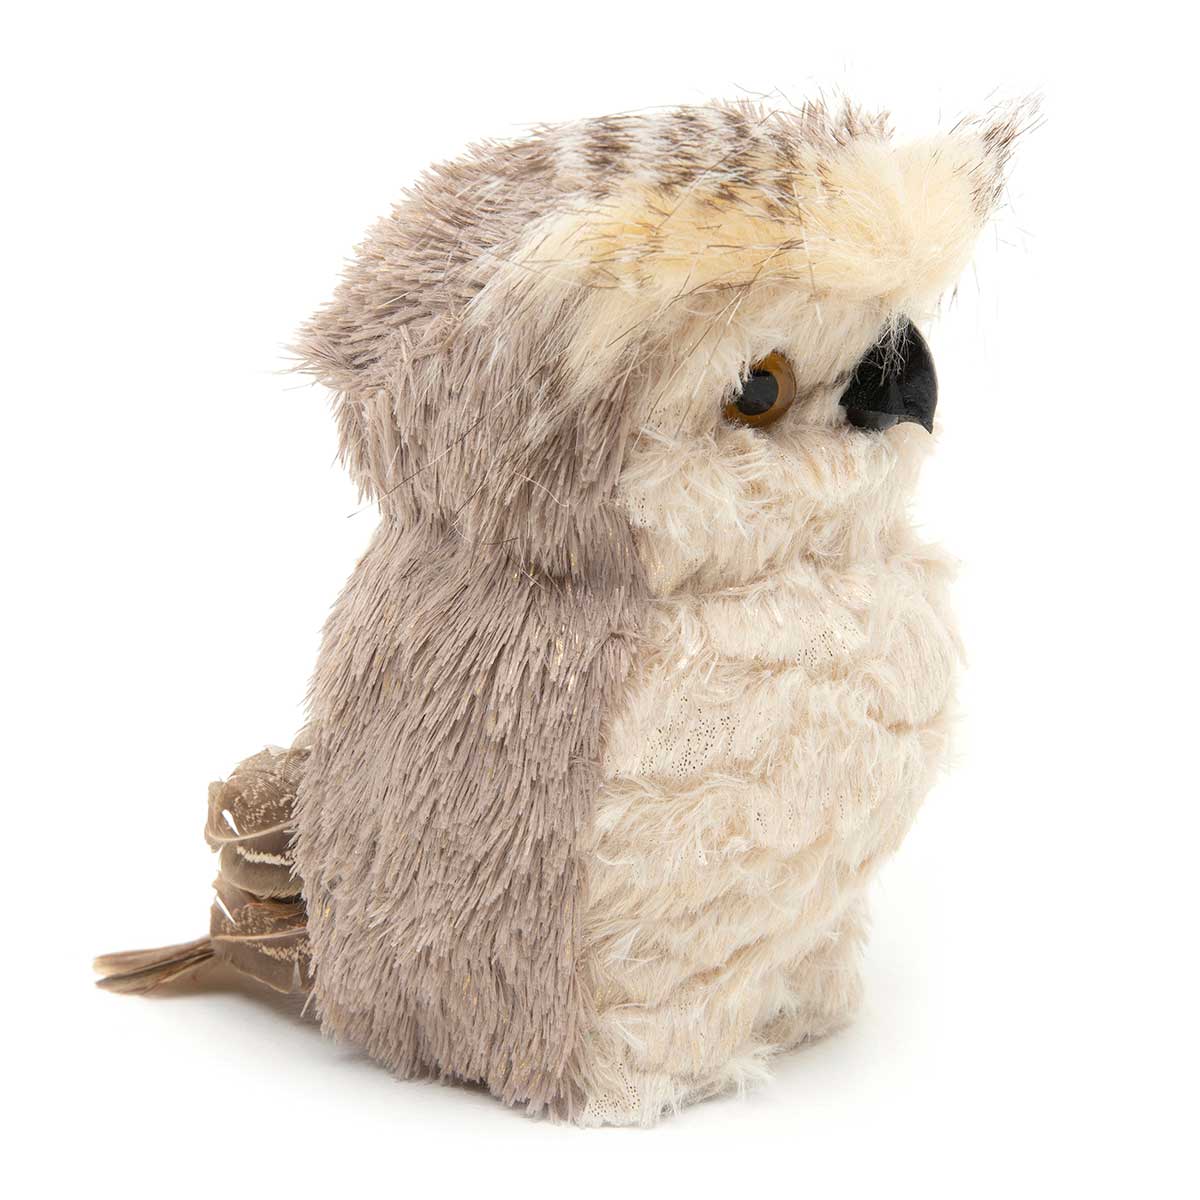 OWL FEATHERED LARGE 3.75IN X 5.75IN X 6IN BROWN/CREAM - Click Image to Close